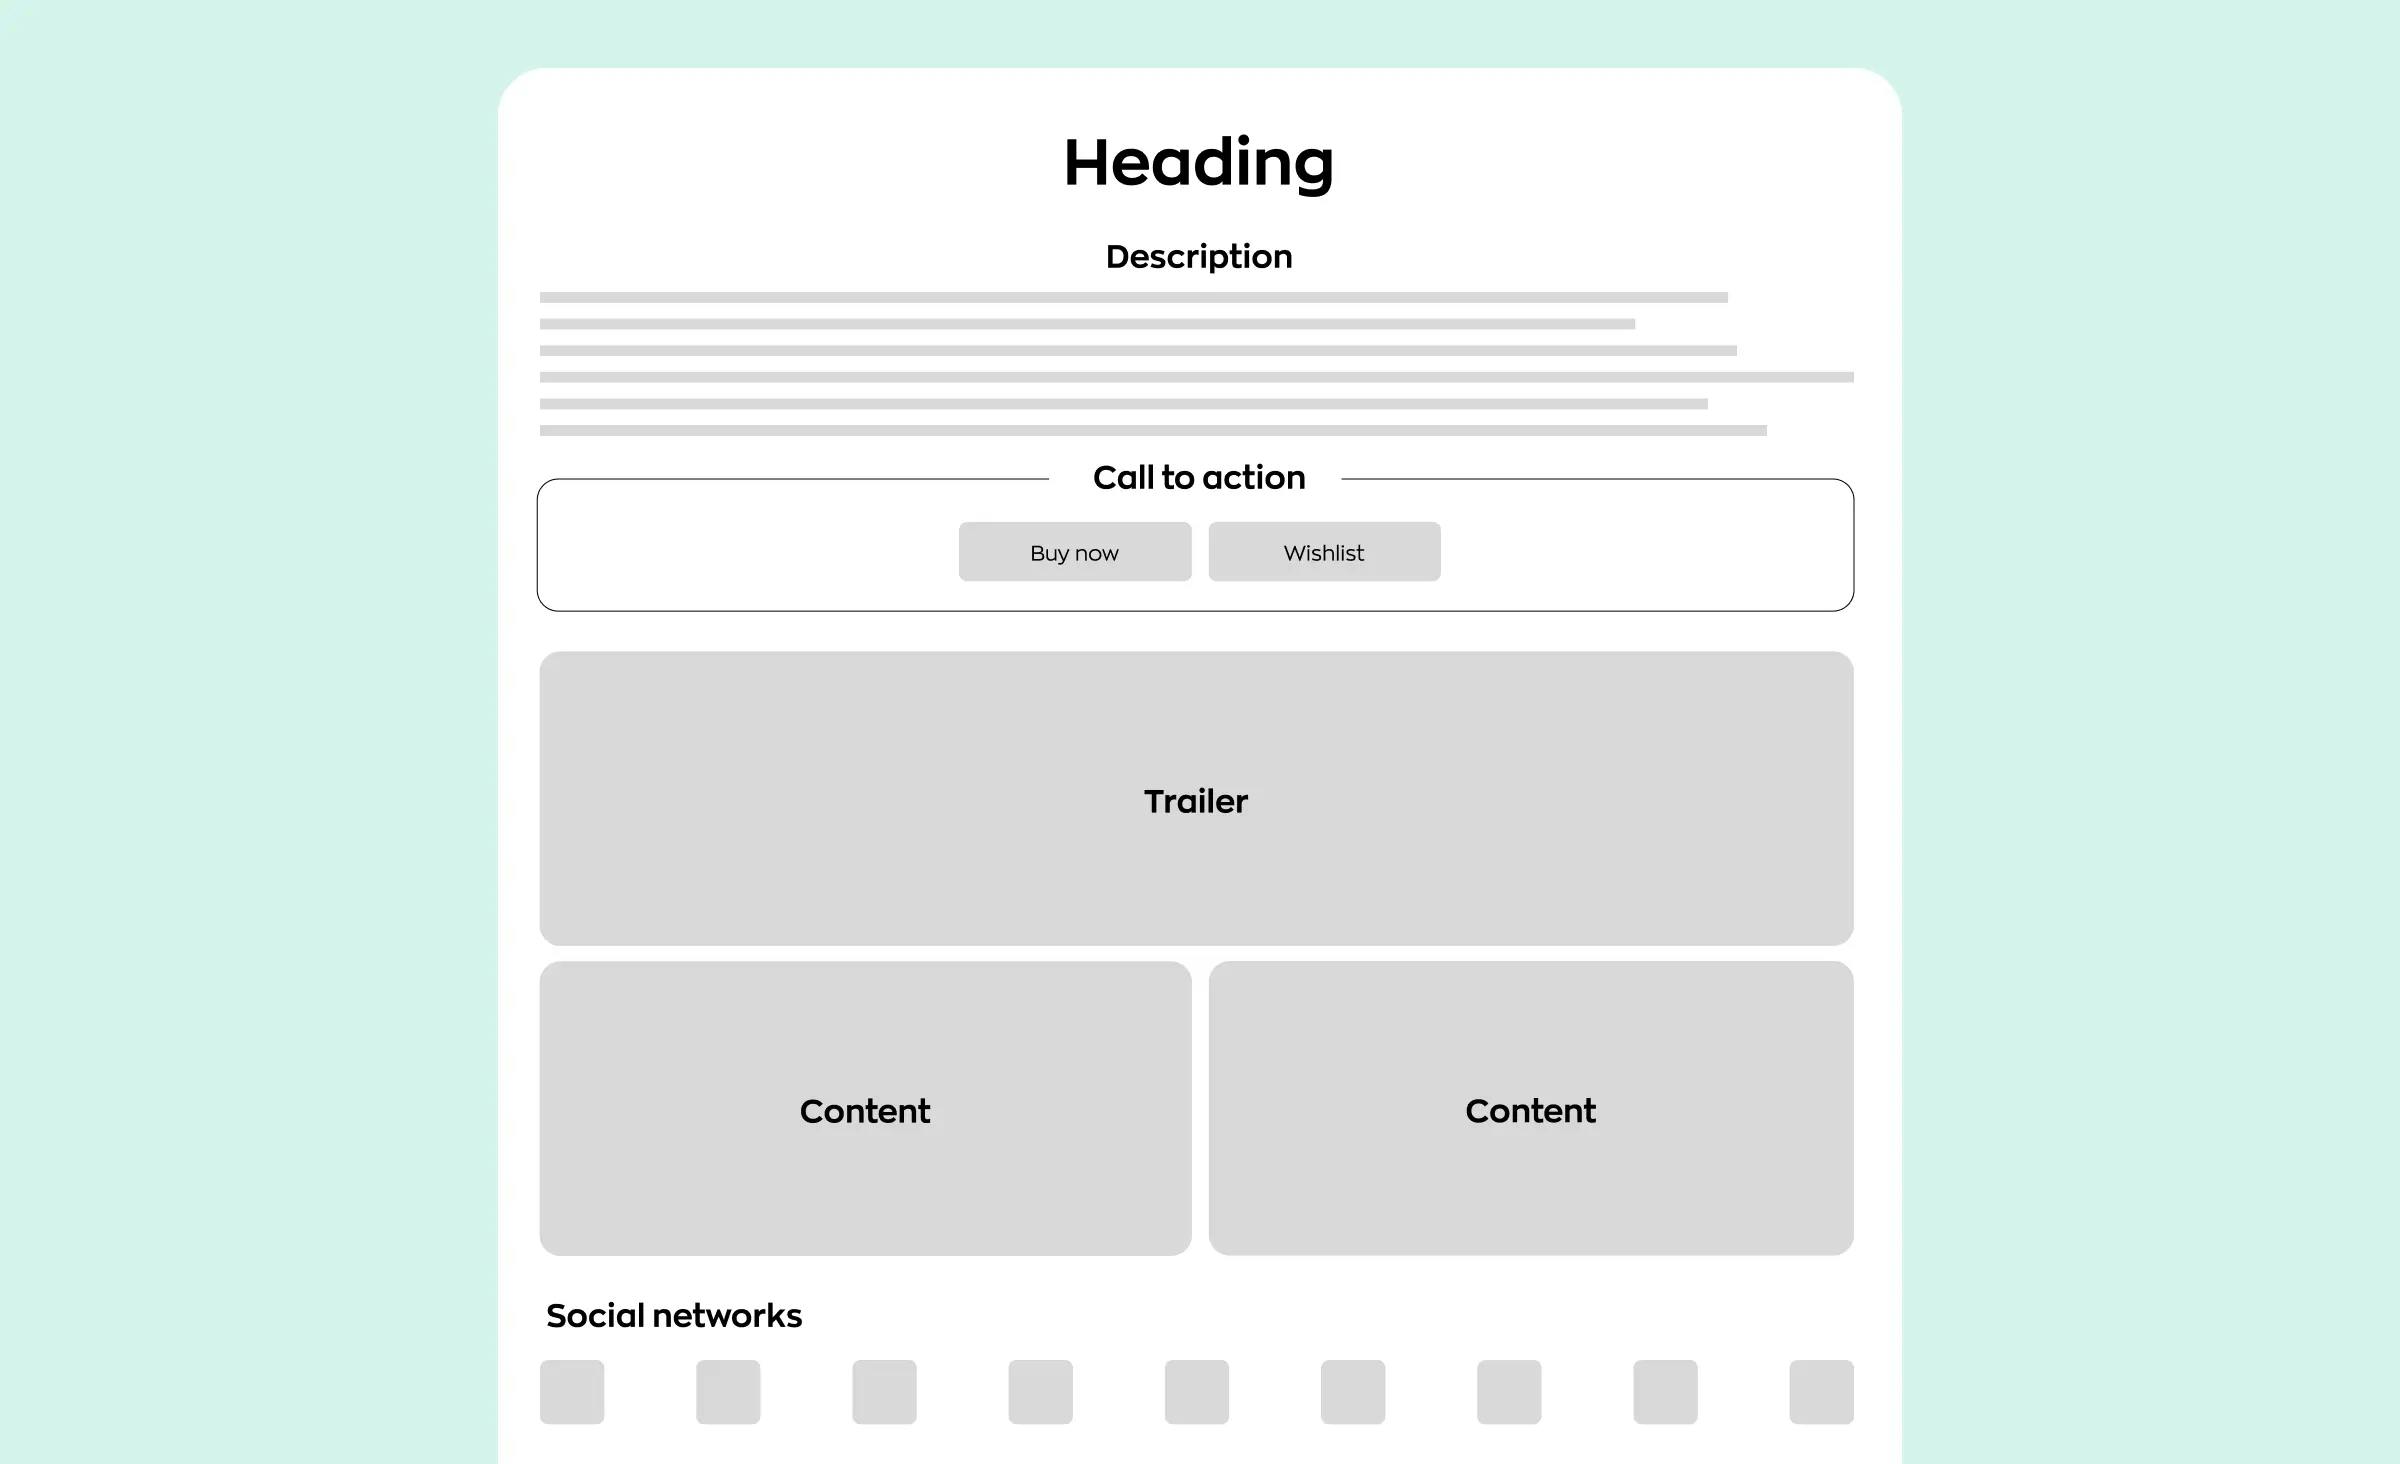 A schematic representation of how to build a game landing page. There should be a heading at the top of the page, then a description and a call to action with opportunities to purchase a game or add it to a wishlist. Next should be a trailer and below comes extra content. At the footer there should be links to social media.